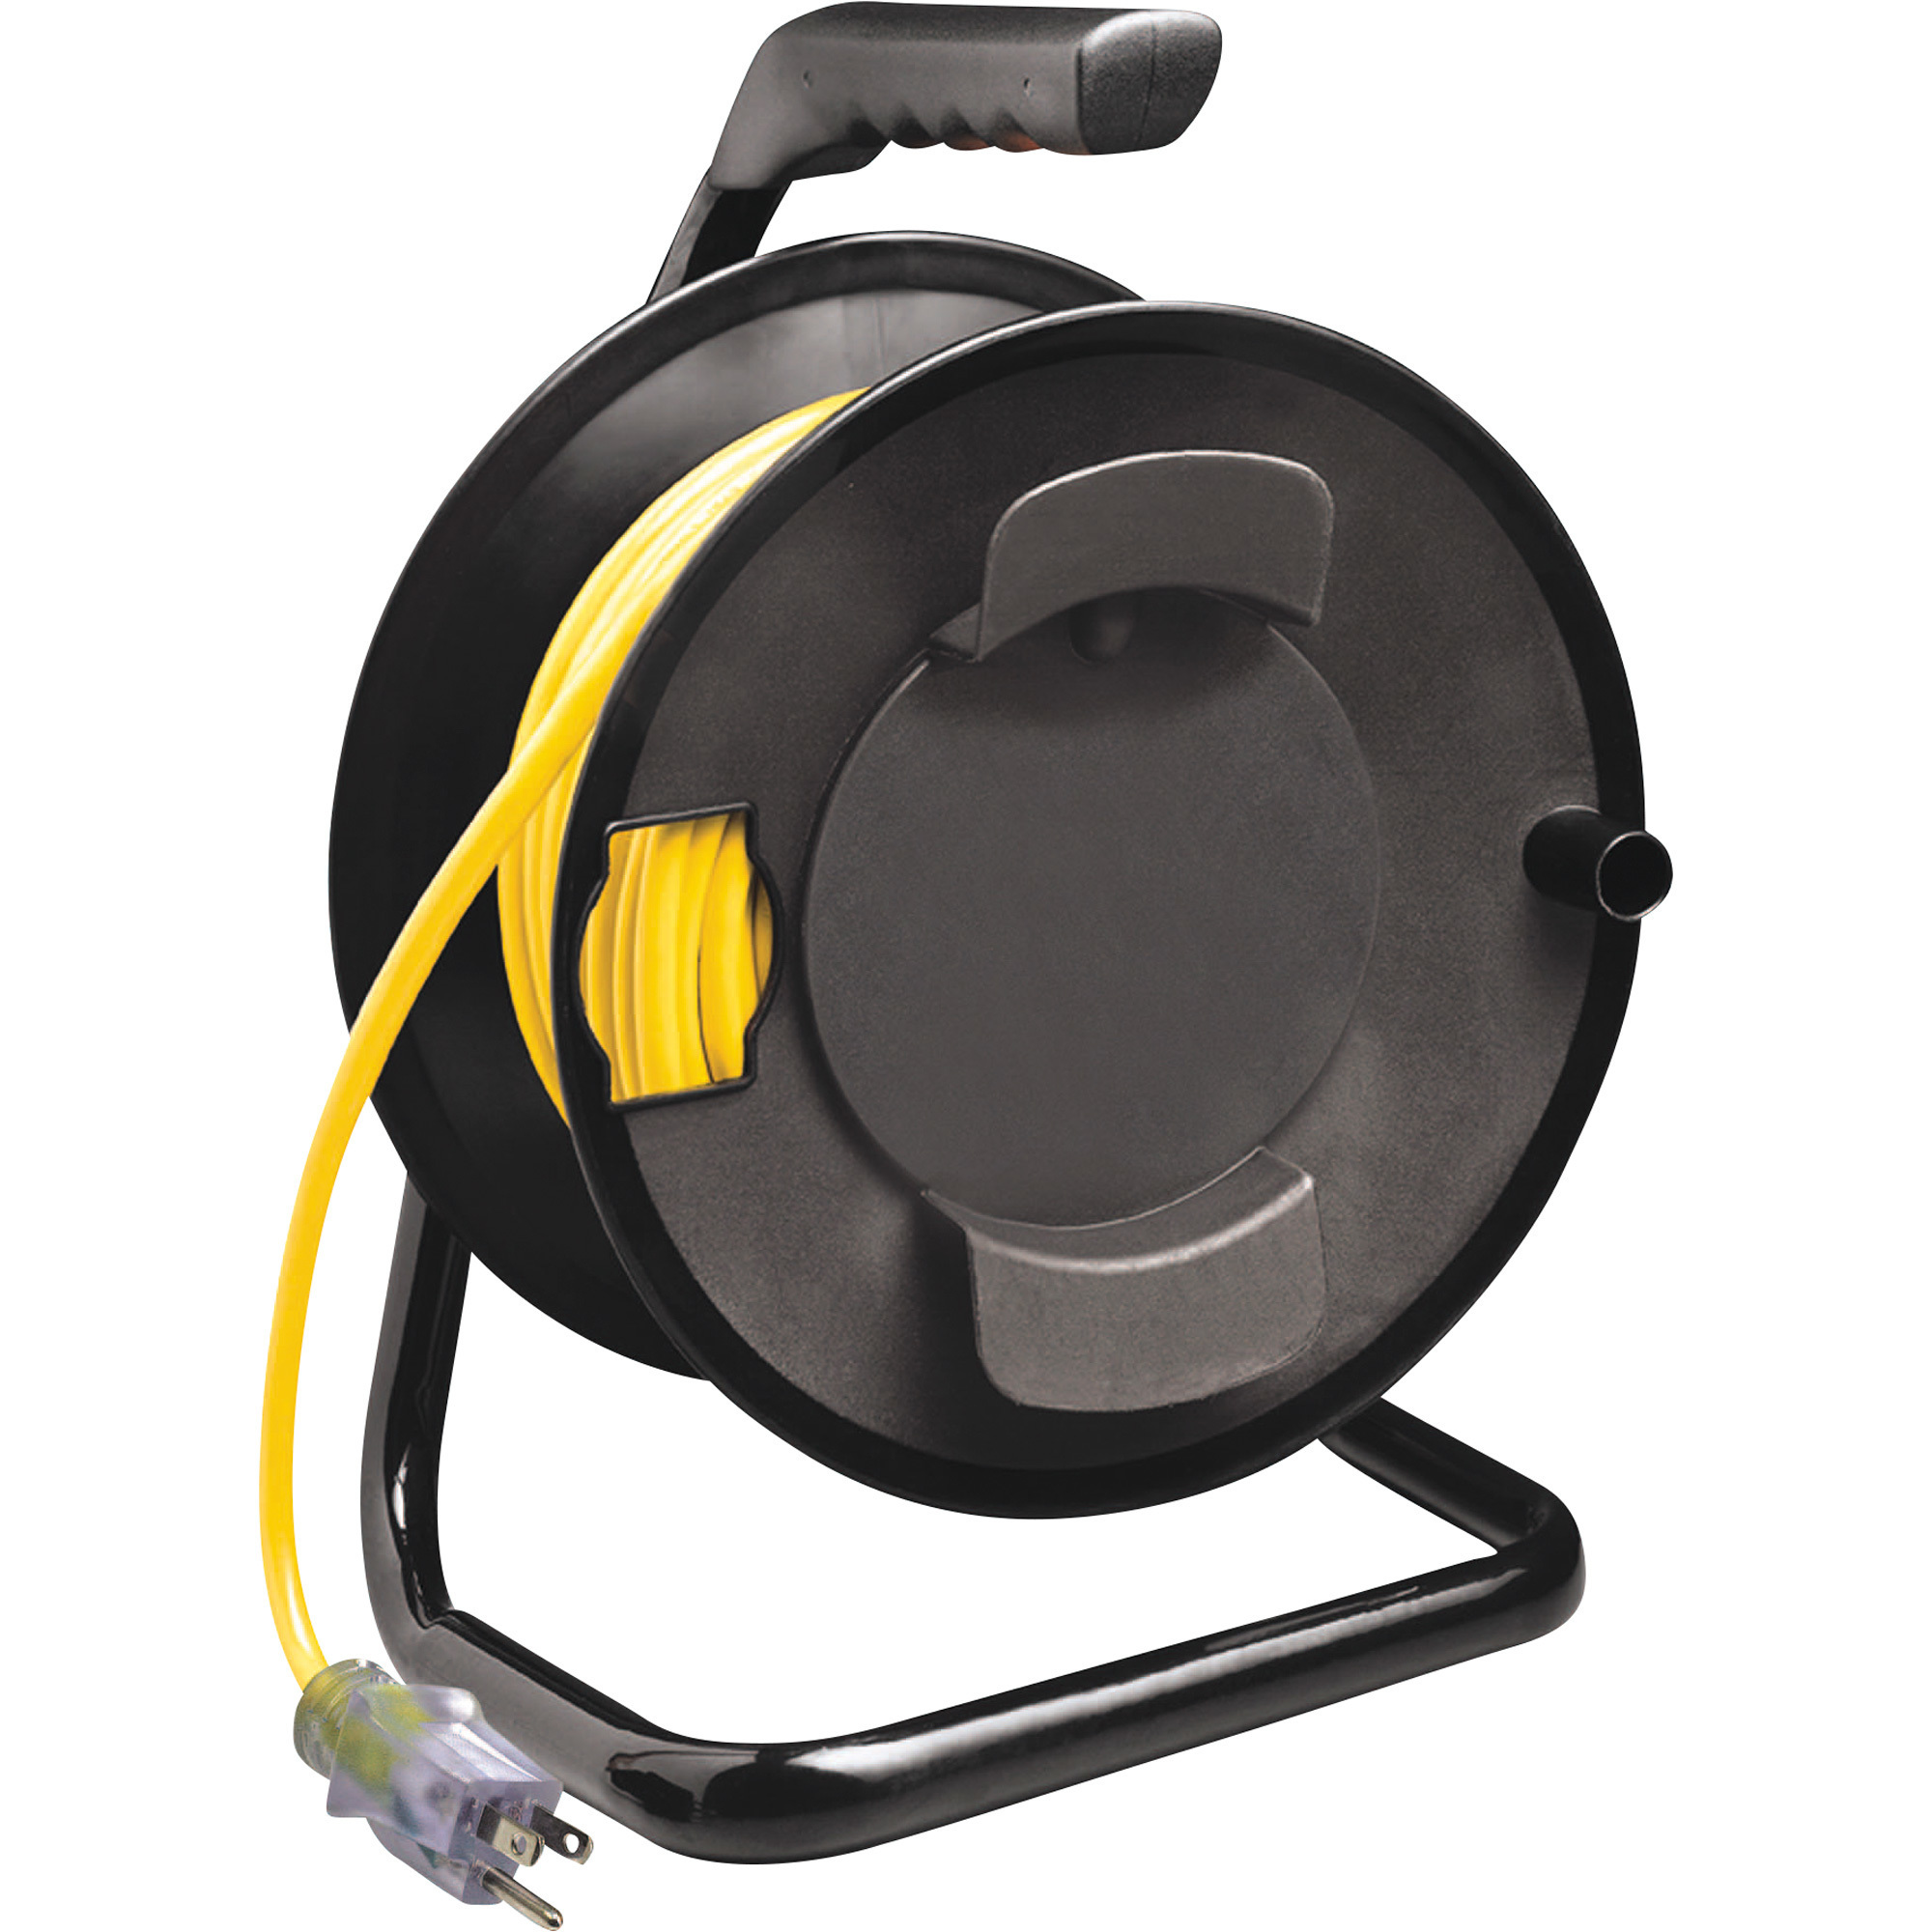 Heavy Duty Metal Extension Cord Reel Stand - Holds Up To 100 Feet